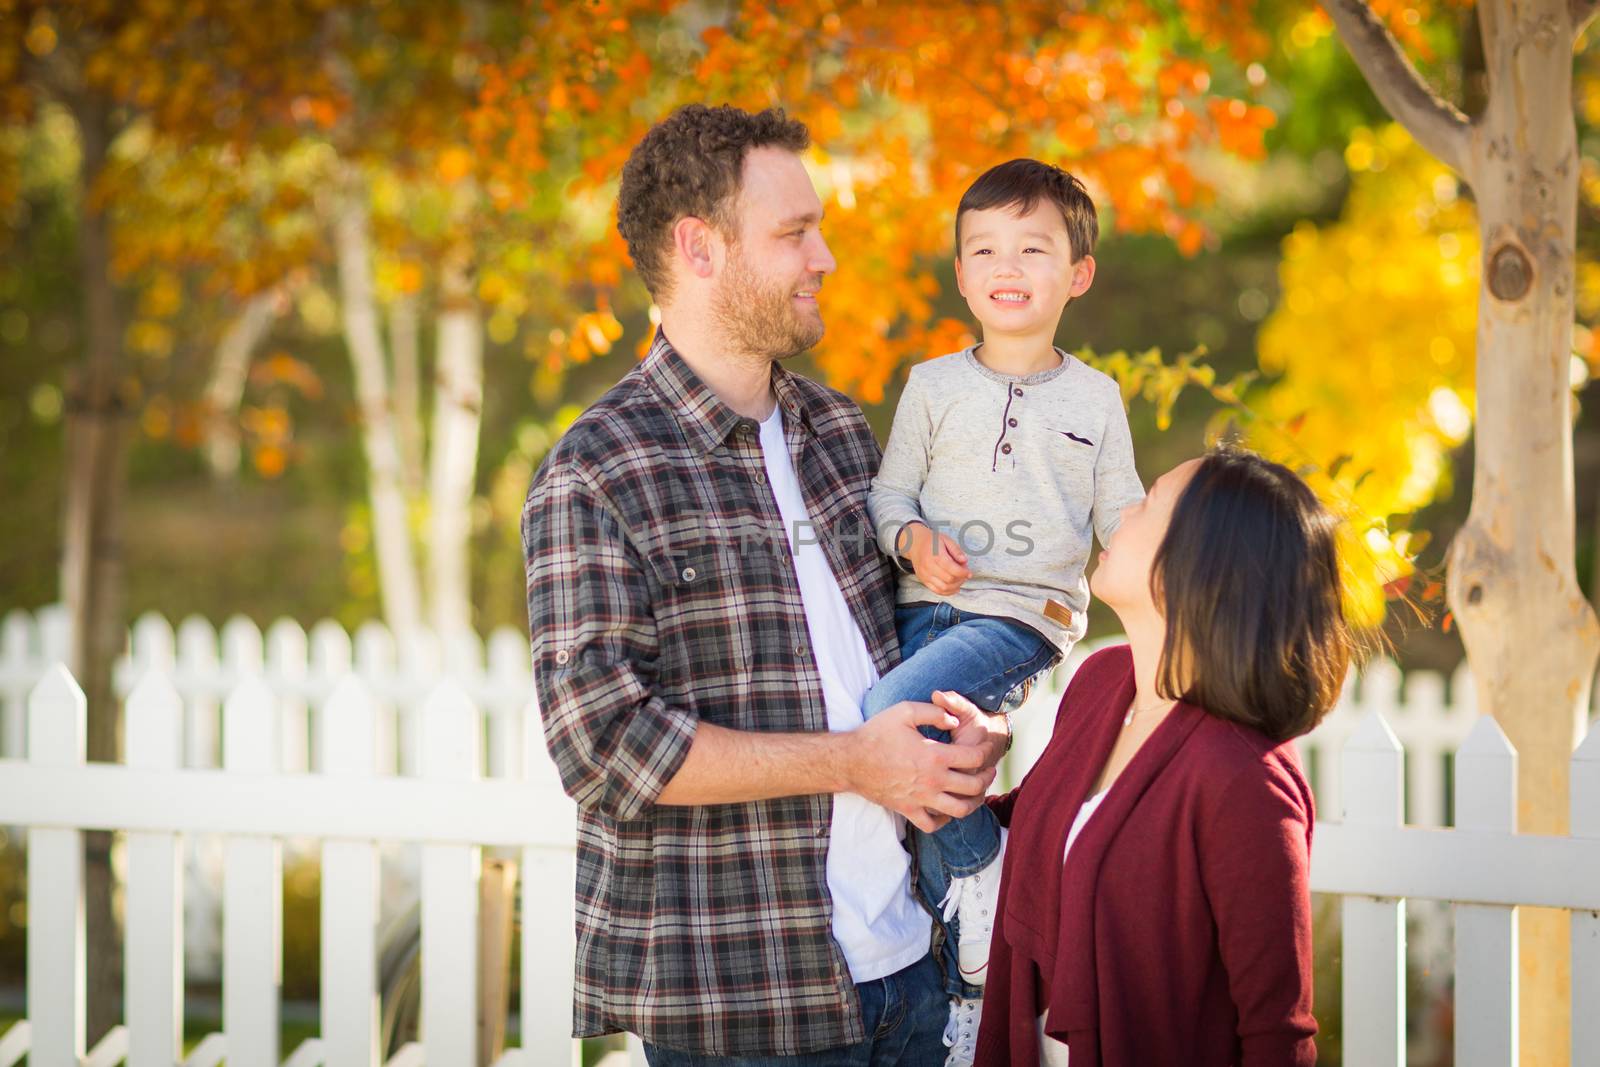 Outdoor Portrait of Mixed Race Chinese and Caucasian Parents and Child. by Feverpitched